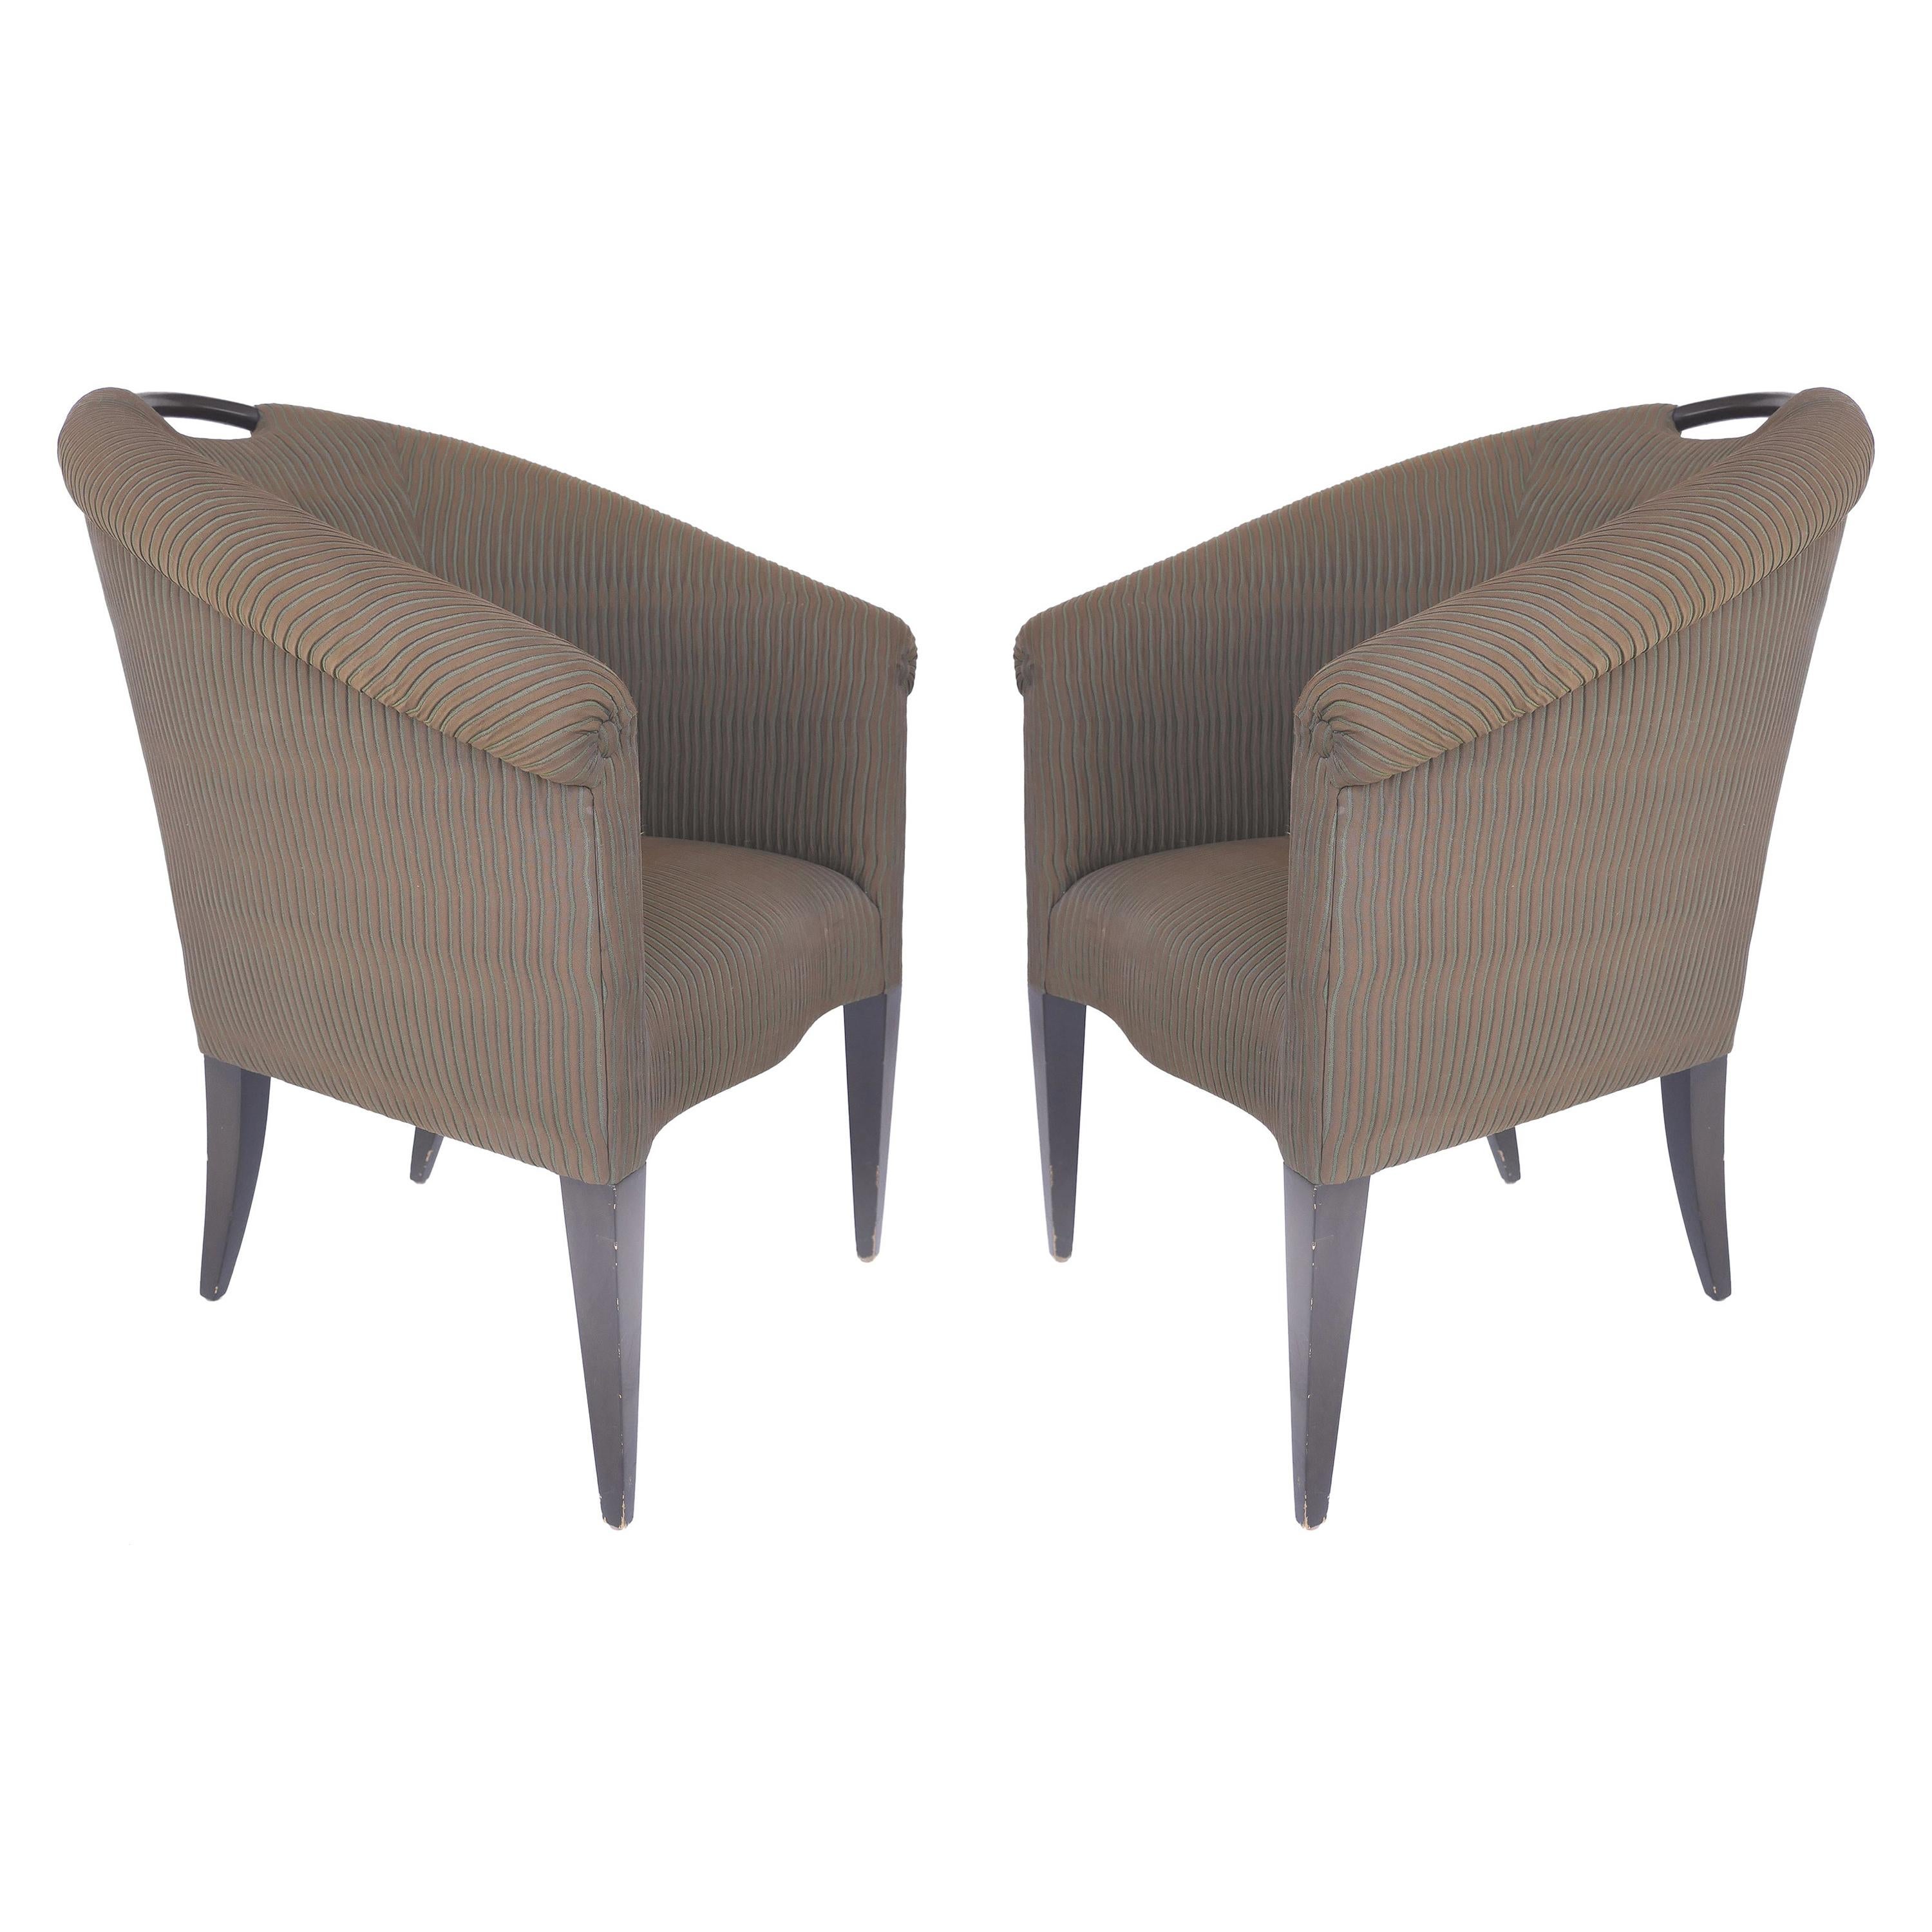 Donghia Upholstered Club Chairs with Wood Handles